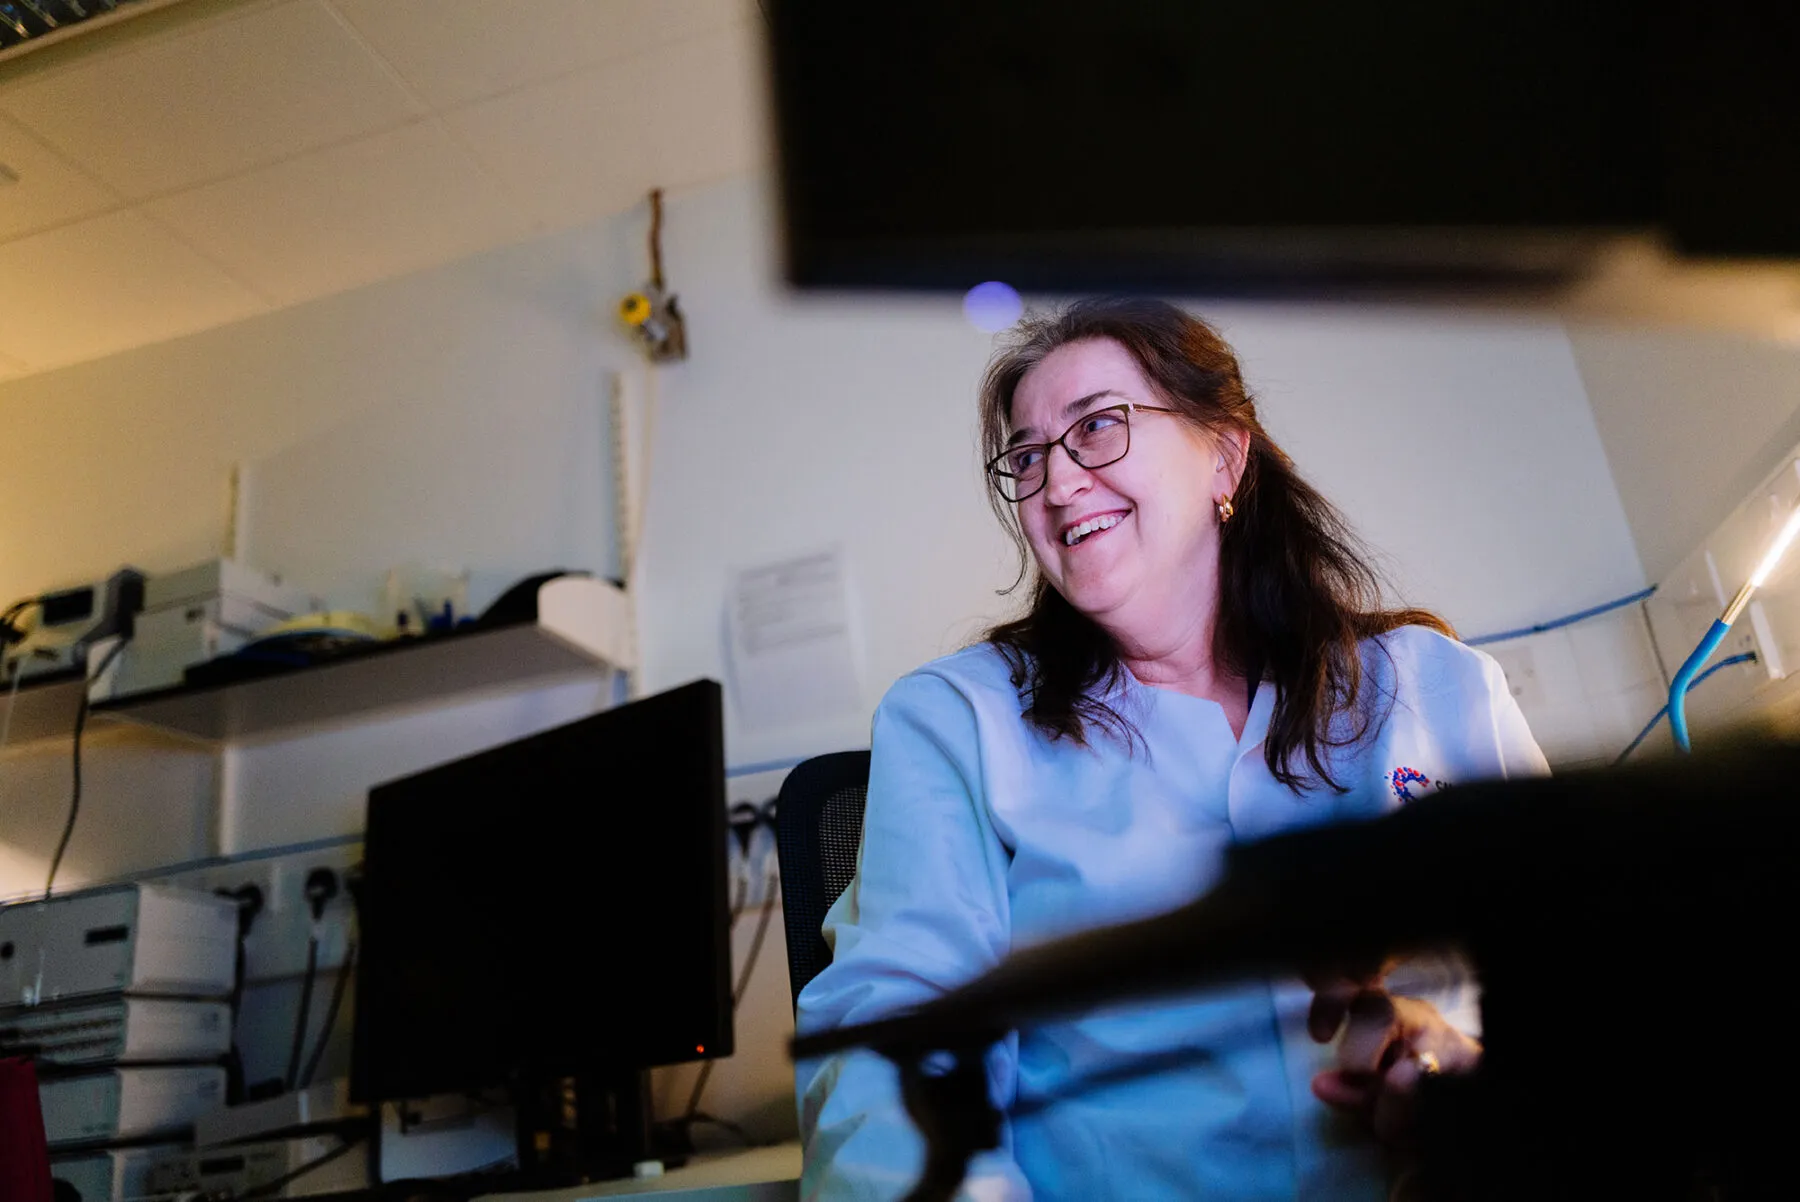 A female researcher in the lab smiling